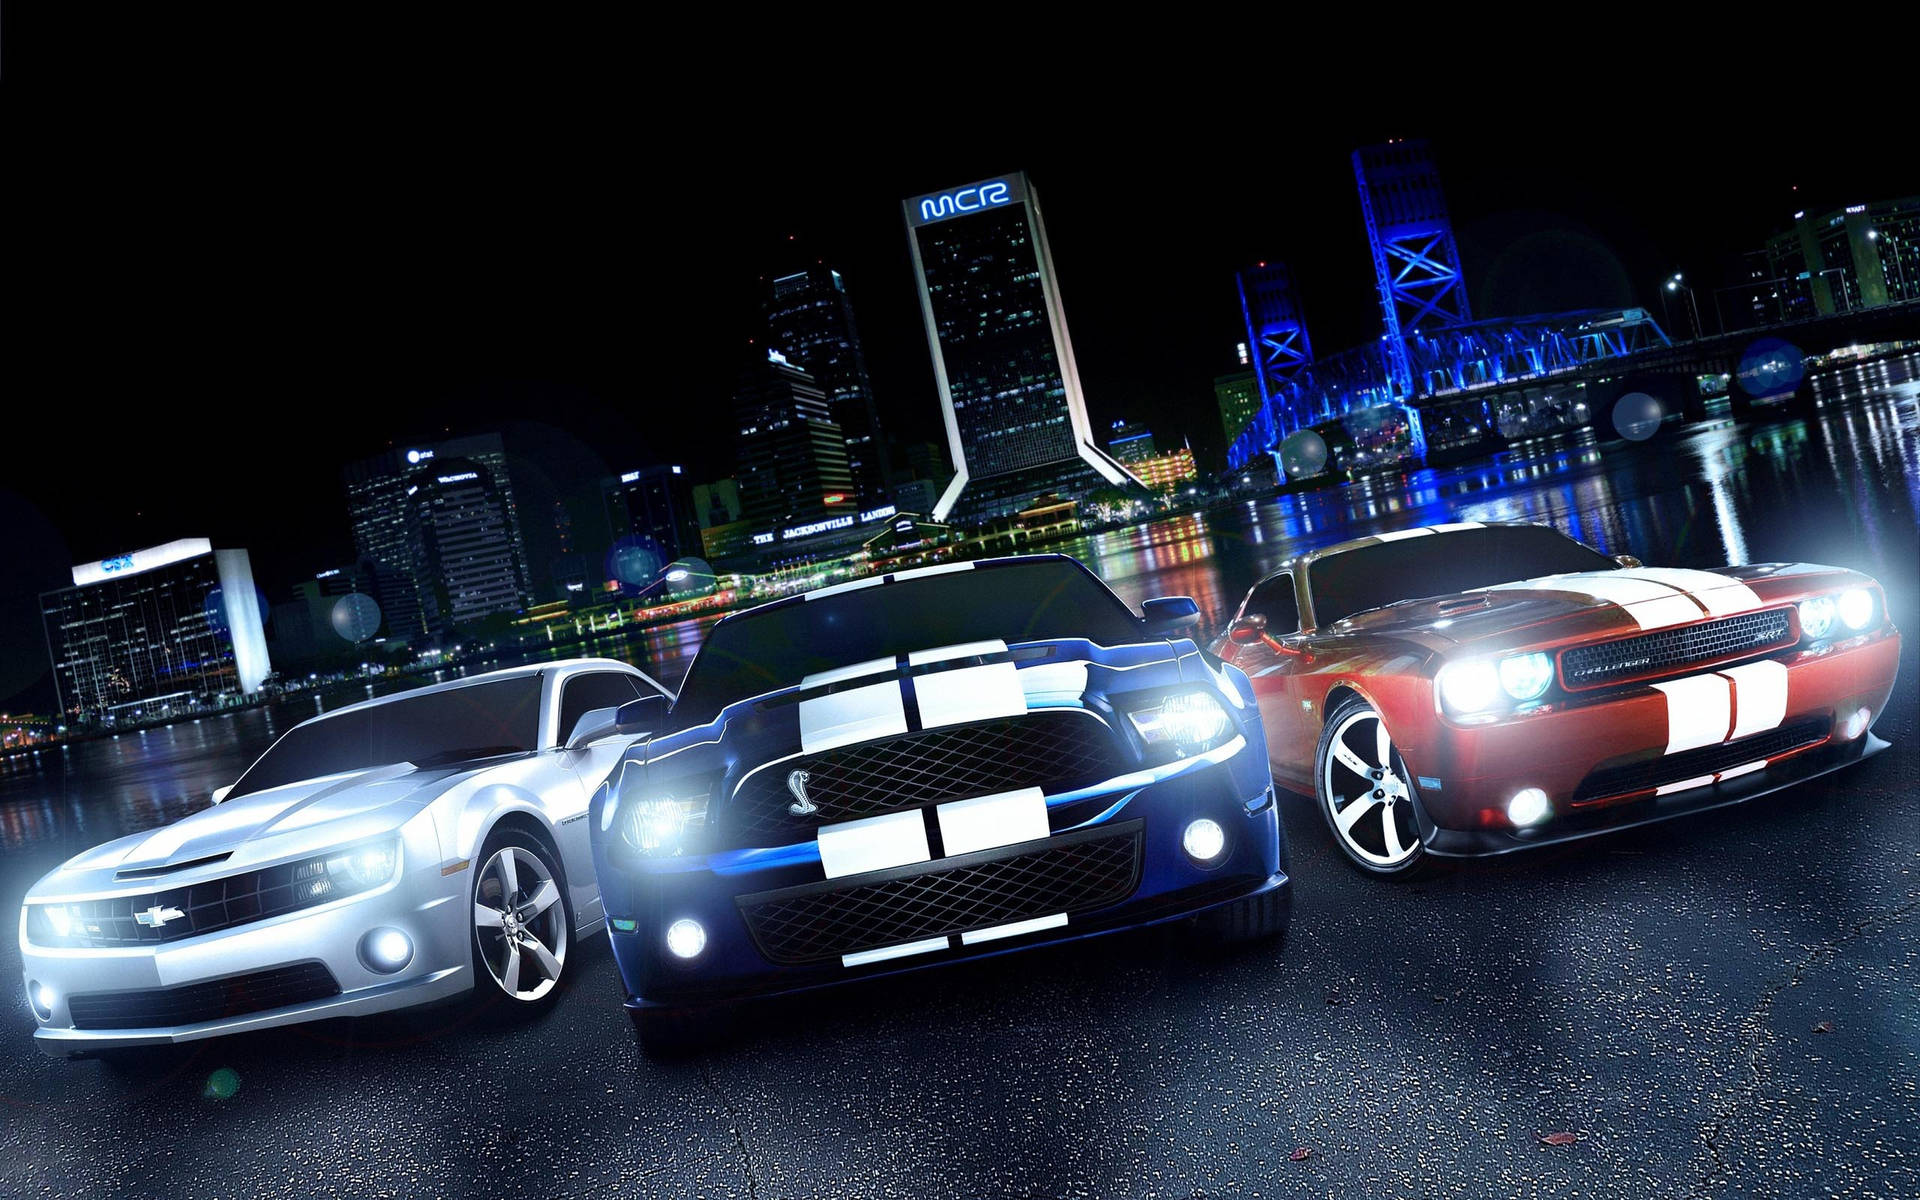 Cool Cars In The City Background